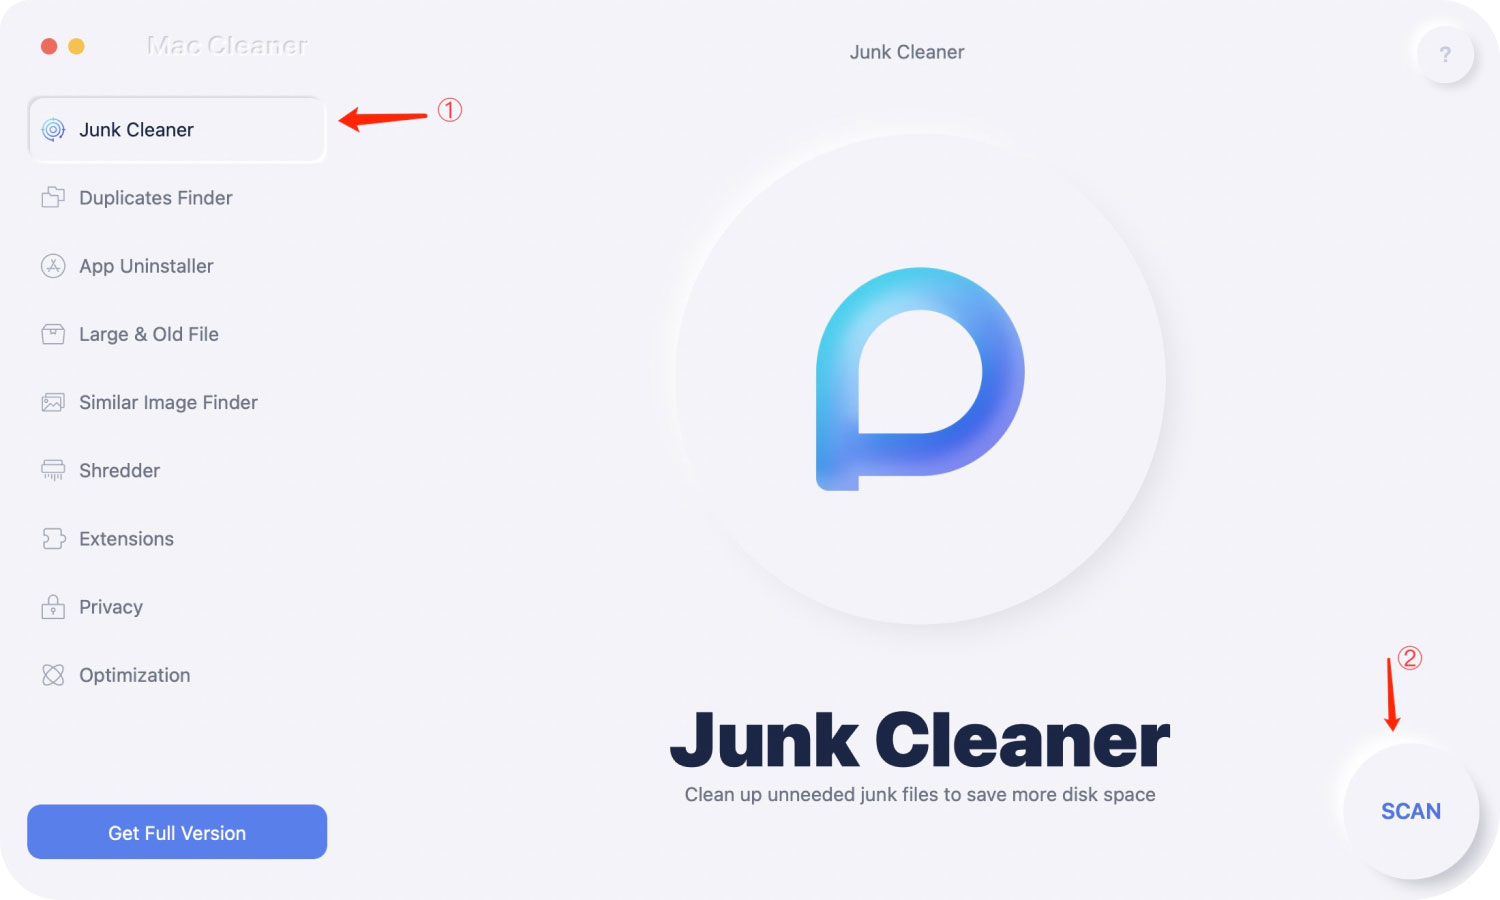 Select Junk Cleaner